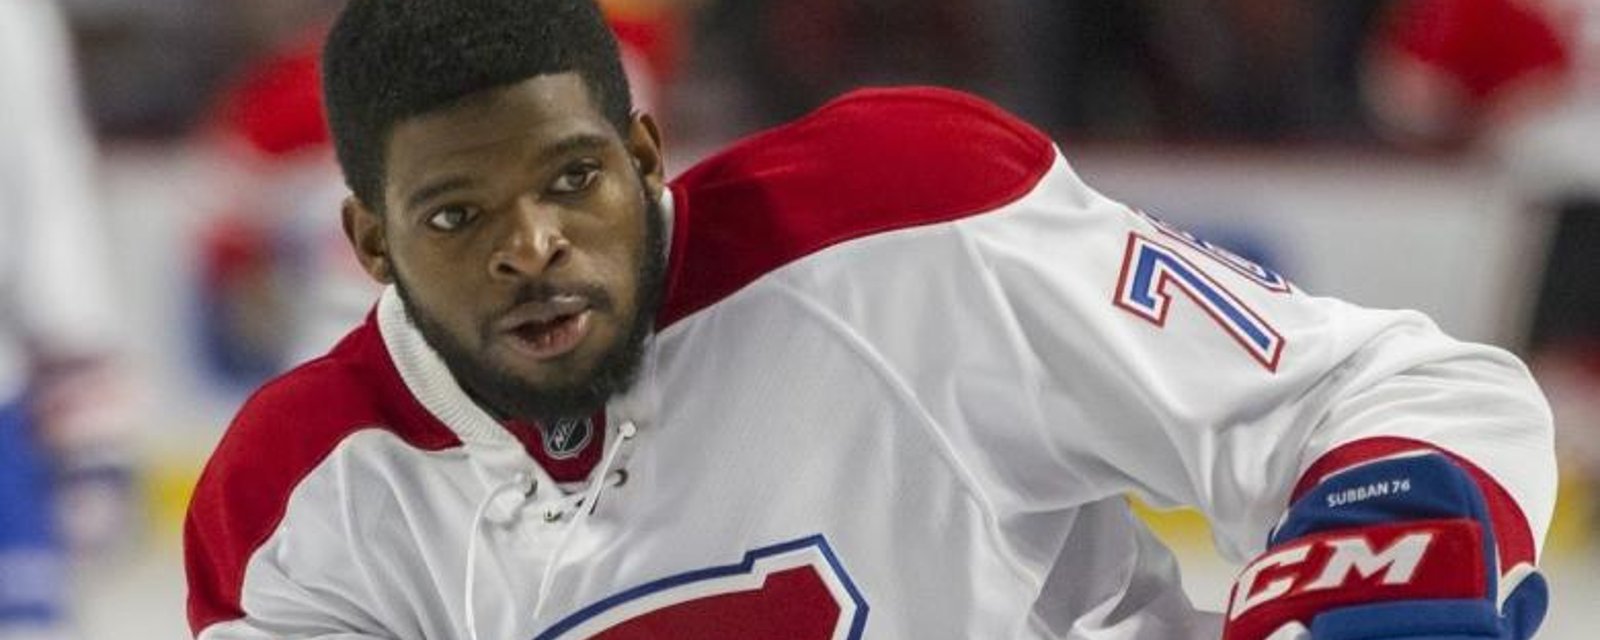 Breaking: NHL GM confirms he has been in negotiations to acquire P.K. Subban!